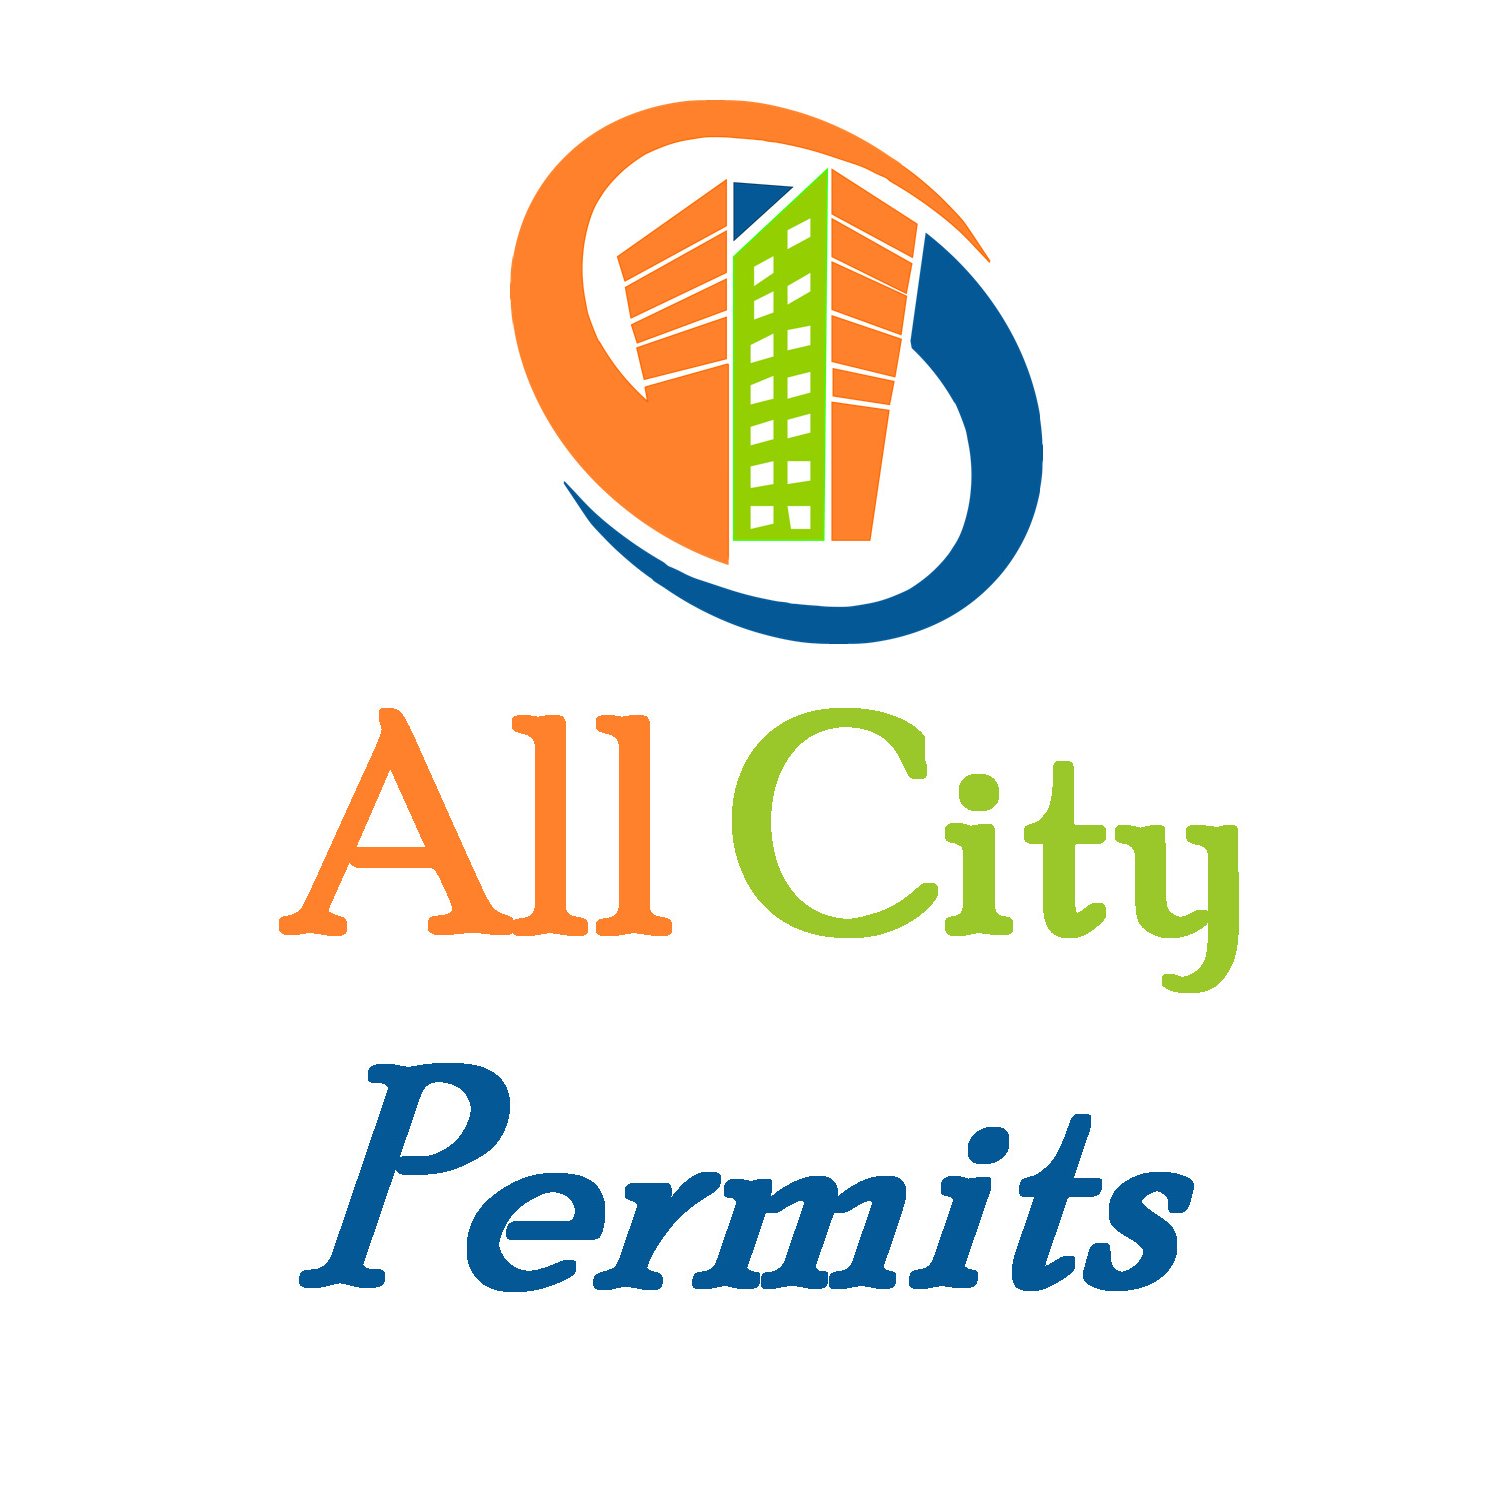 All City Permits is an expert permit expediter / permit runner with many years of expediting permits in South Florida https://t.co/y7Cd3H73hj  305-300-0364